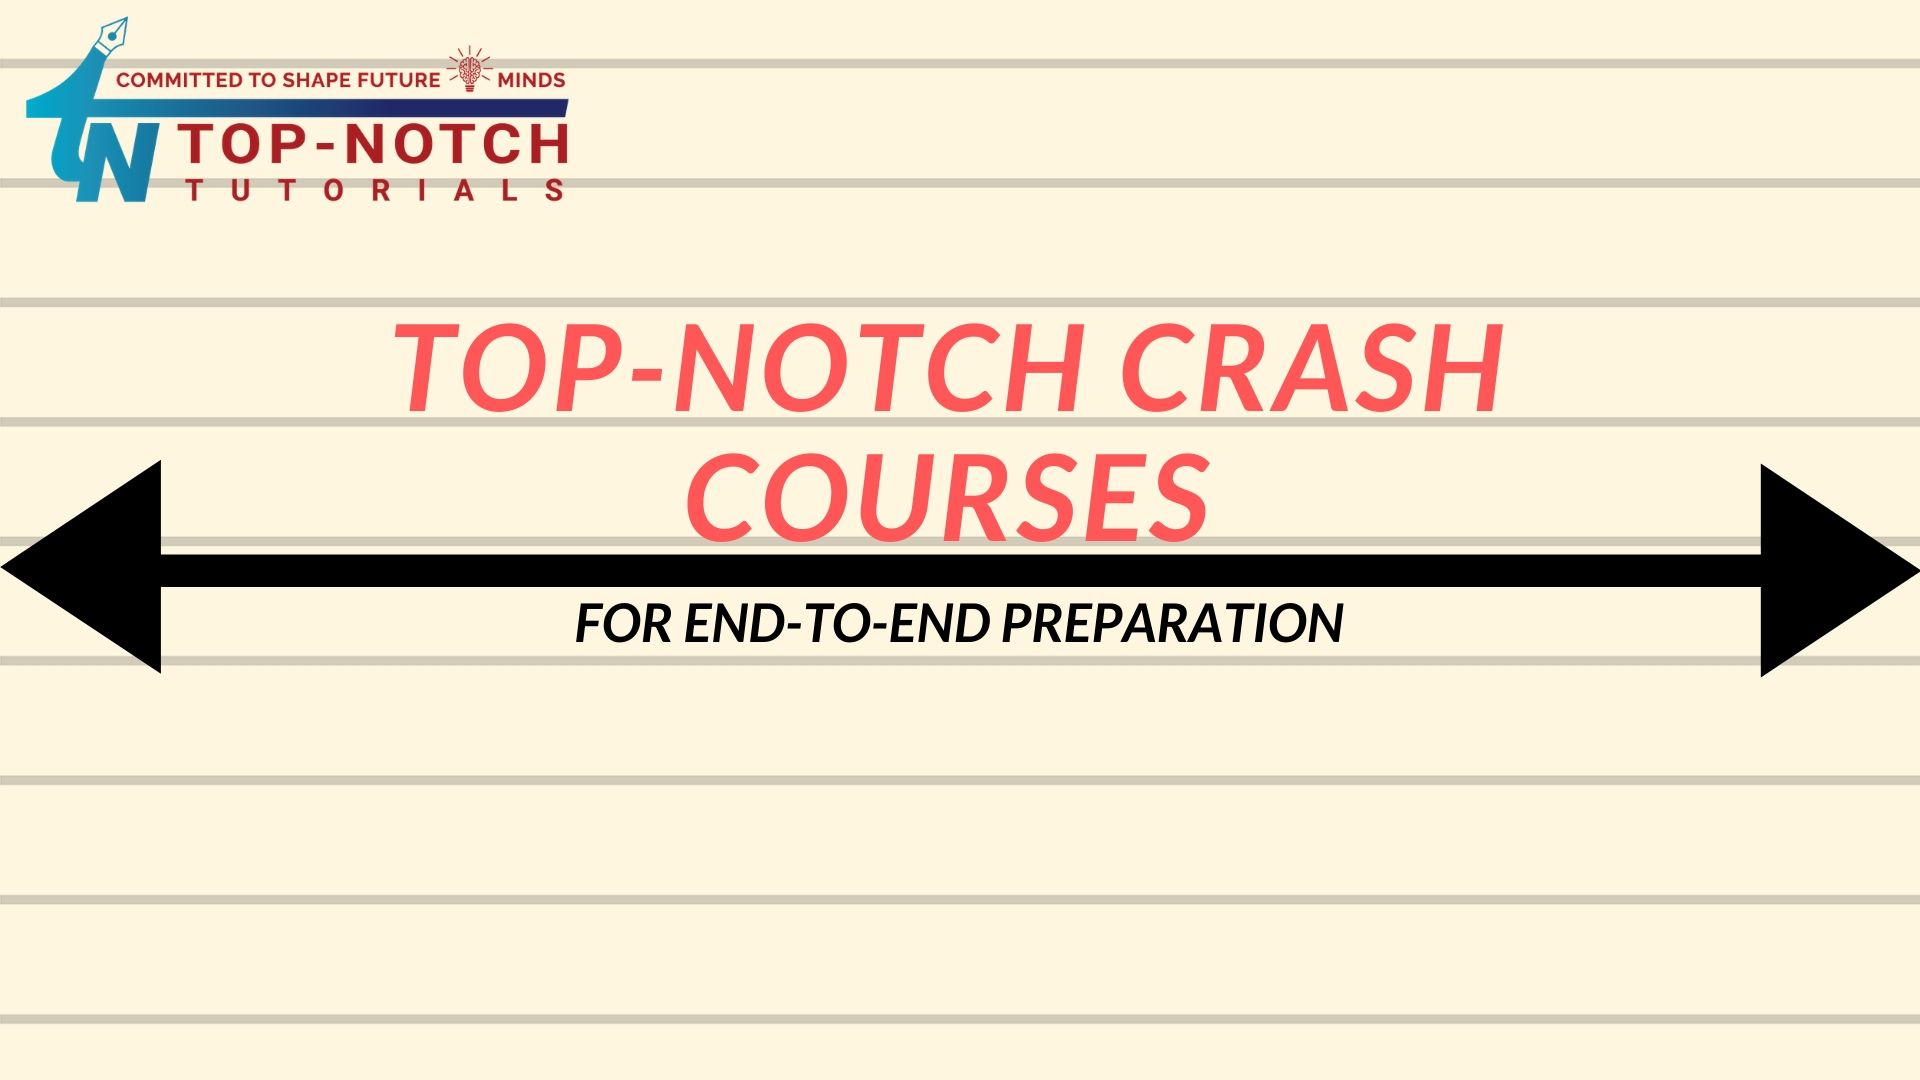 What are Crash Courses and if are relevant for perfect preparation?